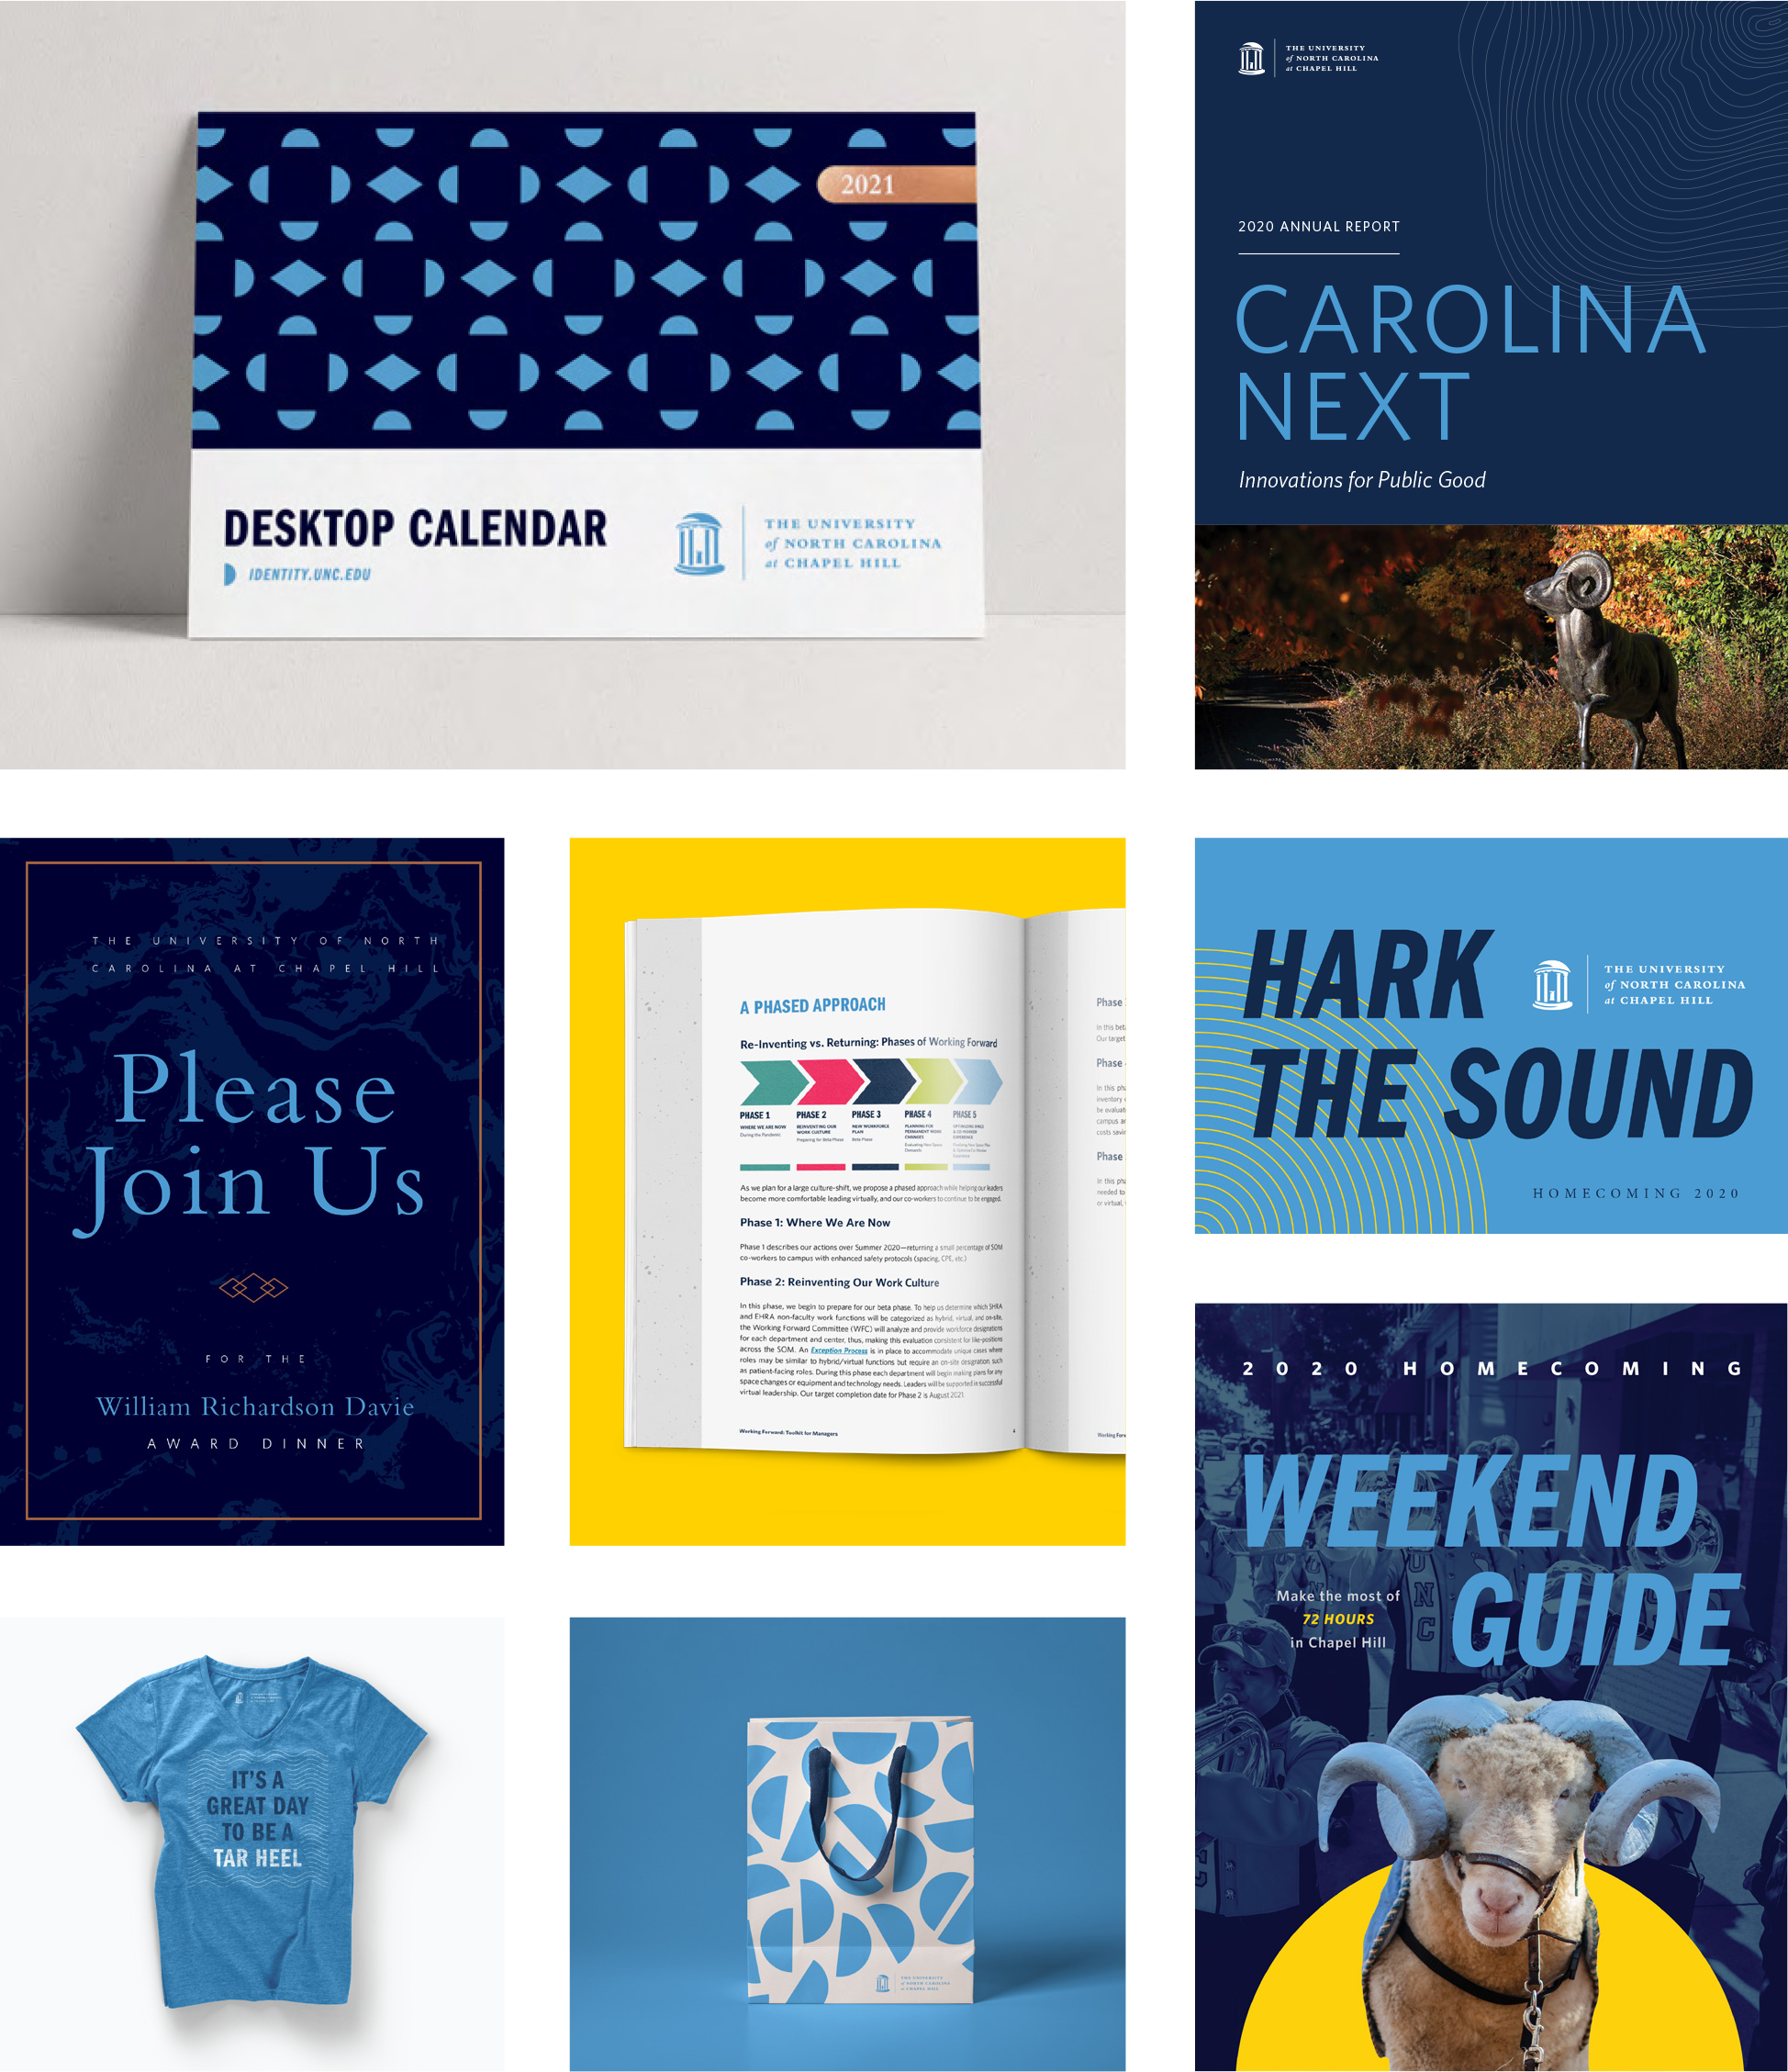 Mockups of designs that show UNC'x brand elements in use. This includes a desk calendar, annual report cover, postcard, brochure cover, shopping bag, tshirt, annual report interior page and invitation.